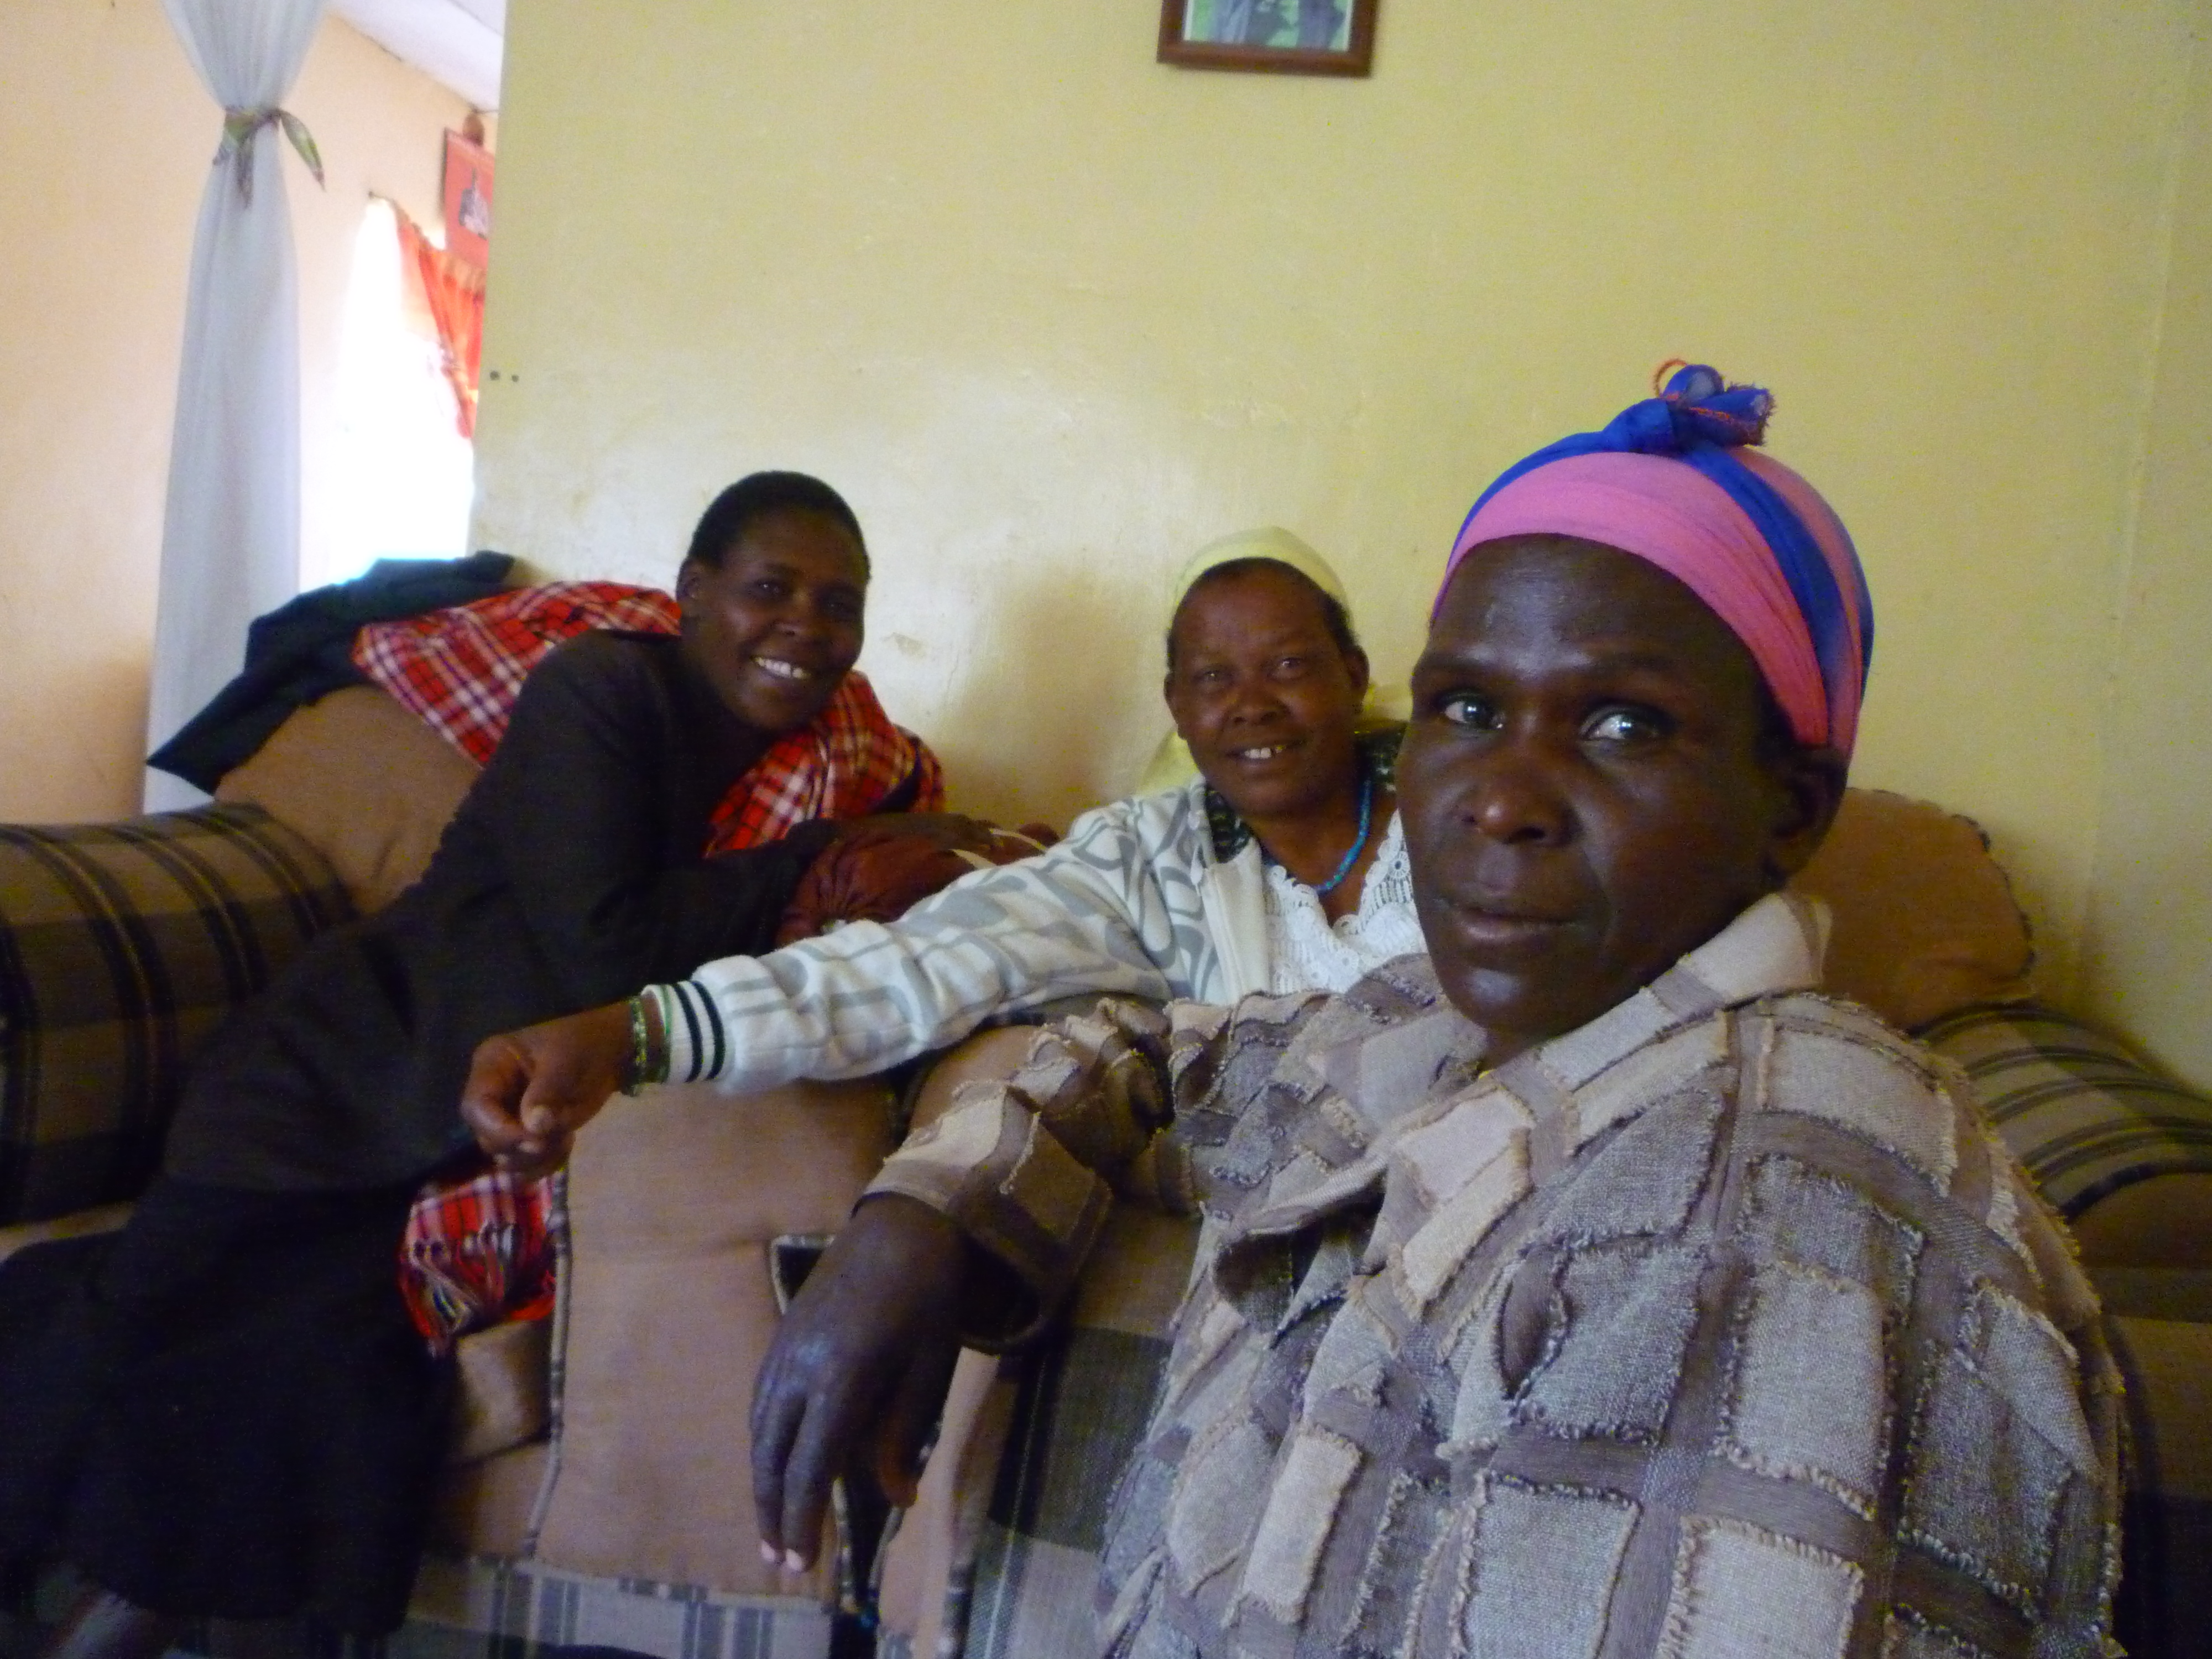 Kipsigis community focus group involving the wives of woman-to-woman marriages